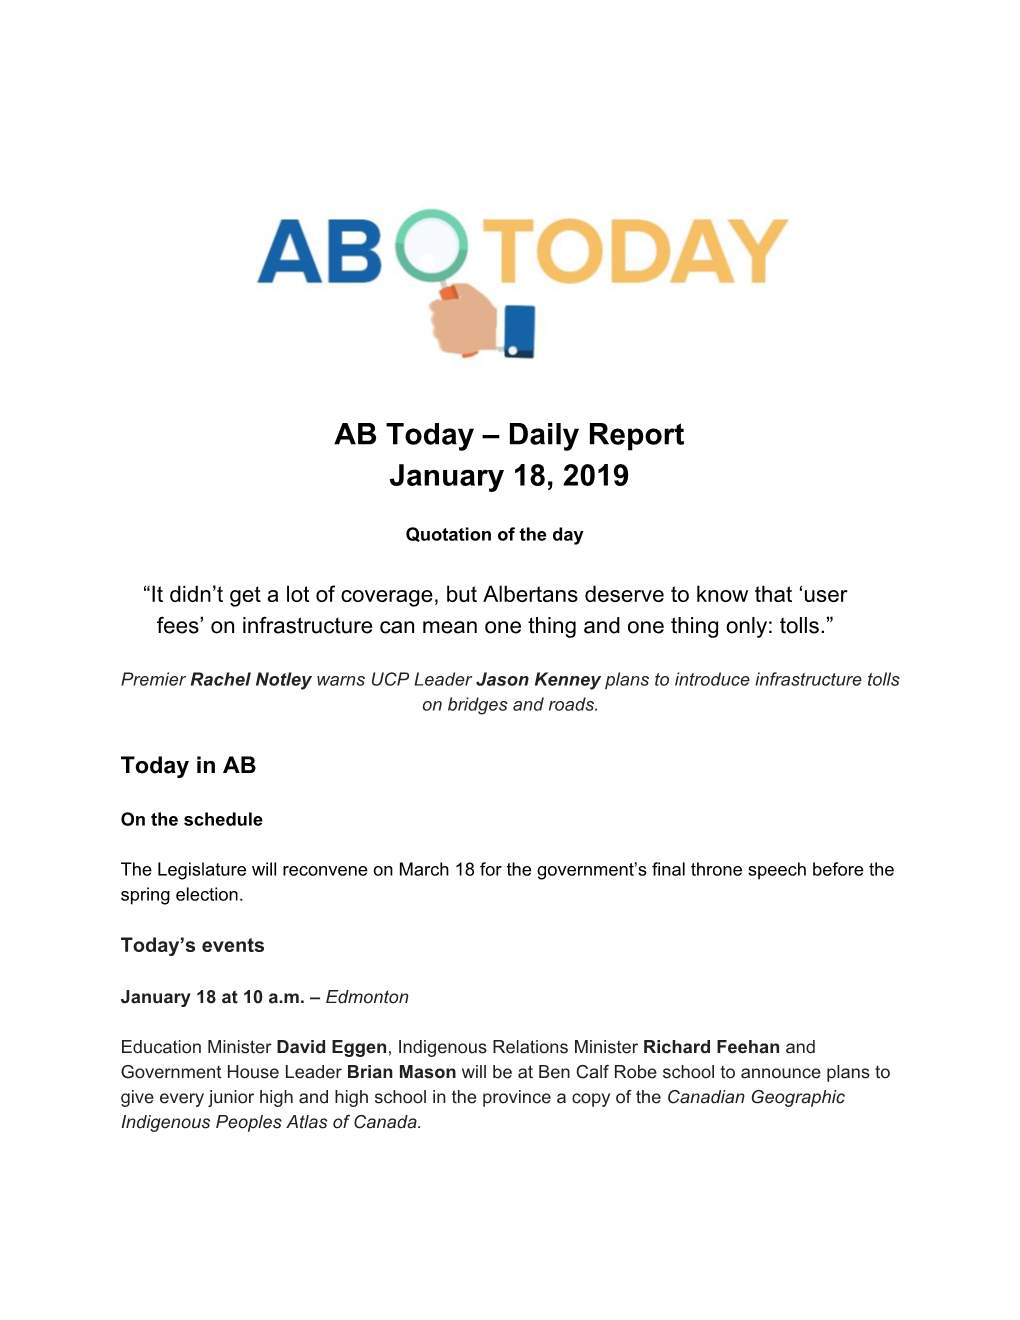 AB Today – Daily Report January 18, 2019